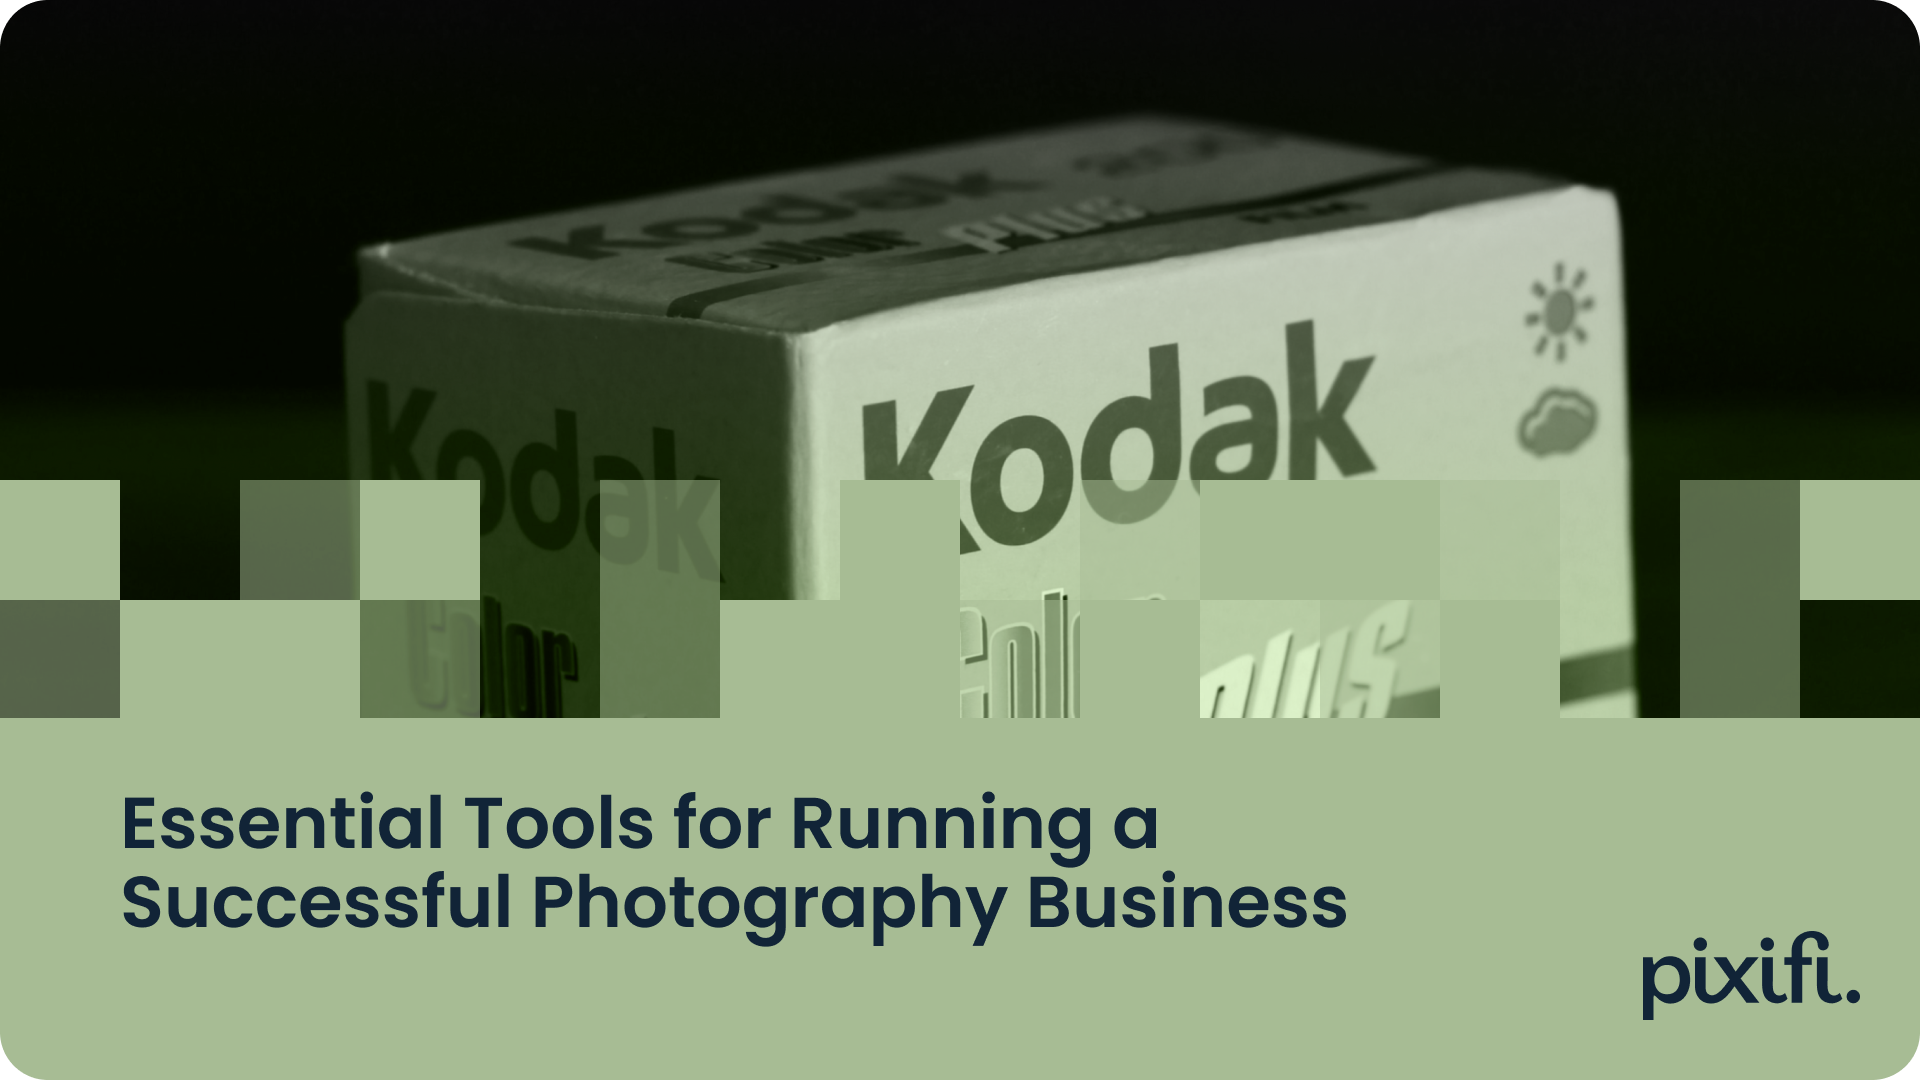 Essential Tools for Running a Successful Photography Business